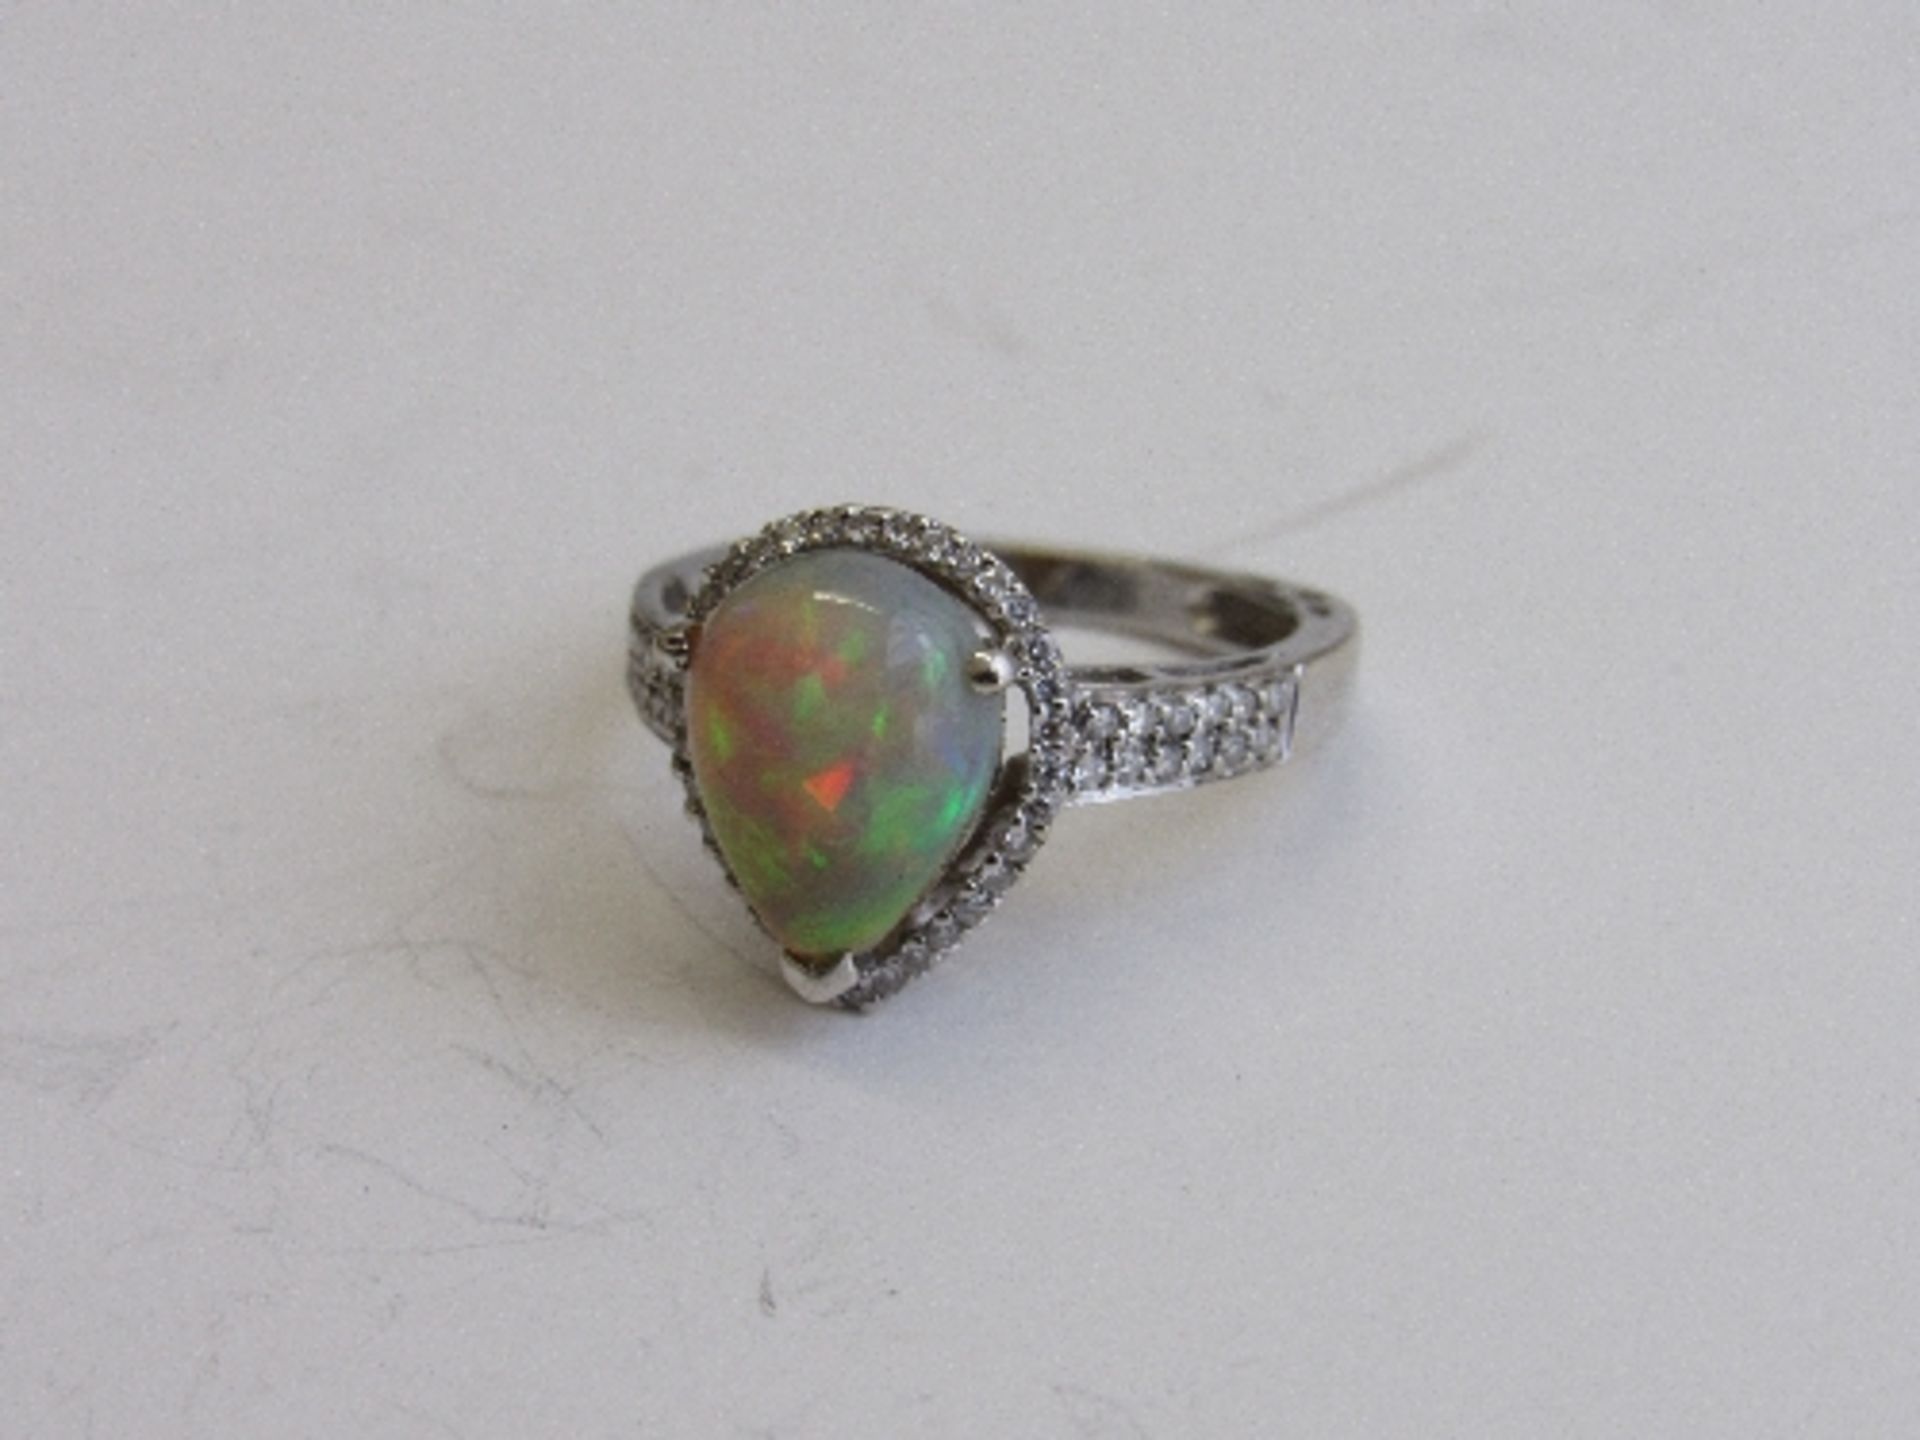 18ct white gold, diamond & pear shaped opal rings, size N. Estimate £850-1,000. - Image 2 of 2